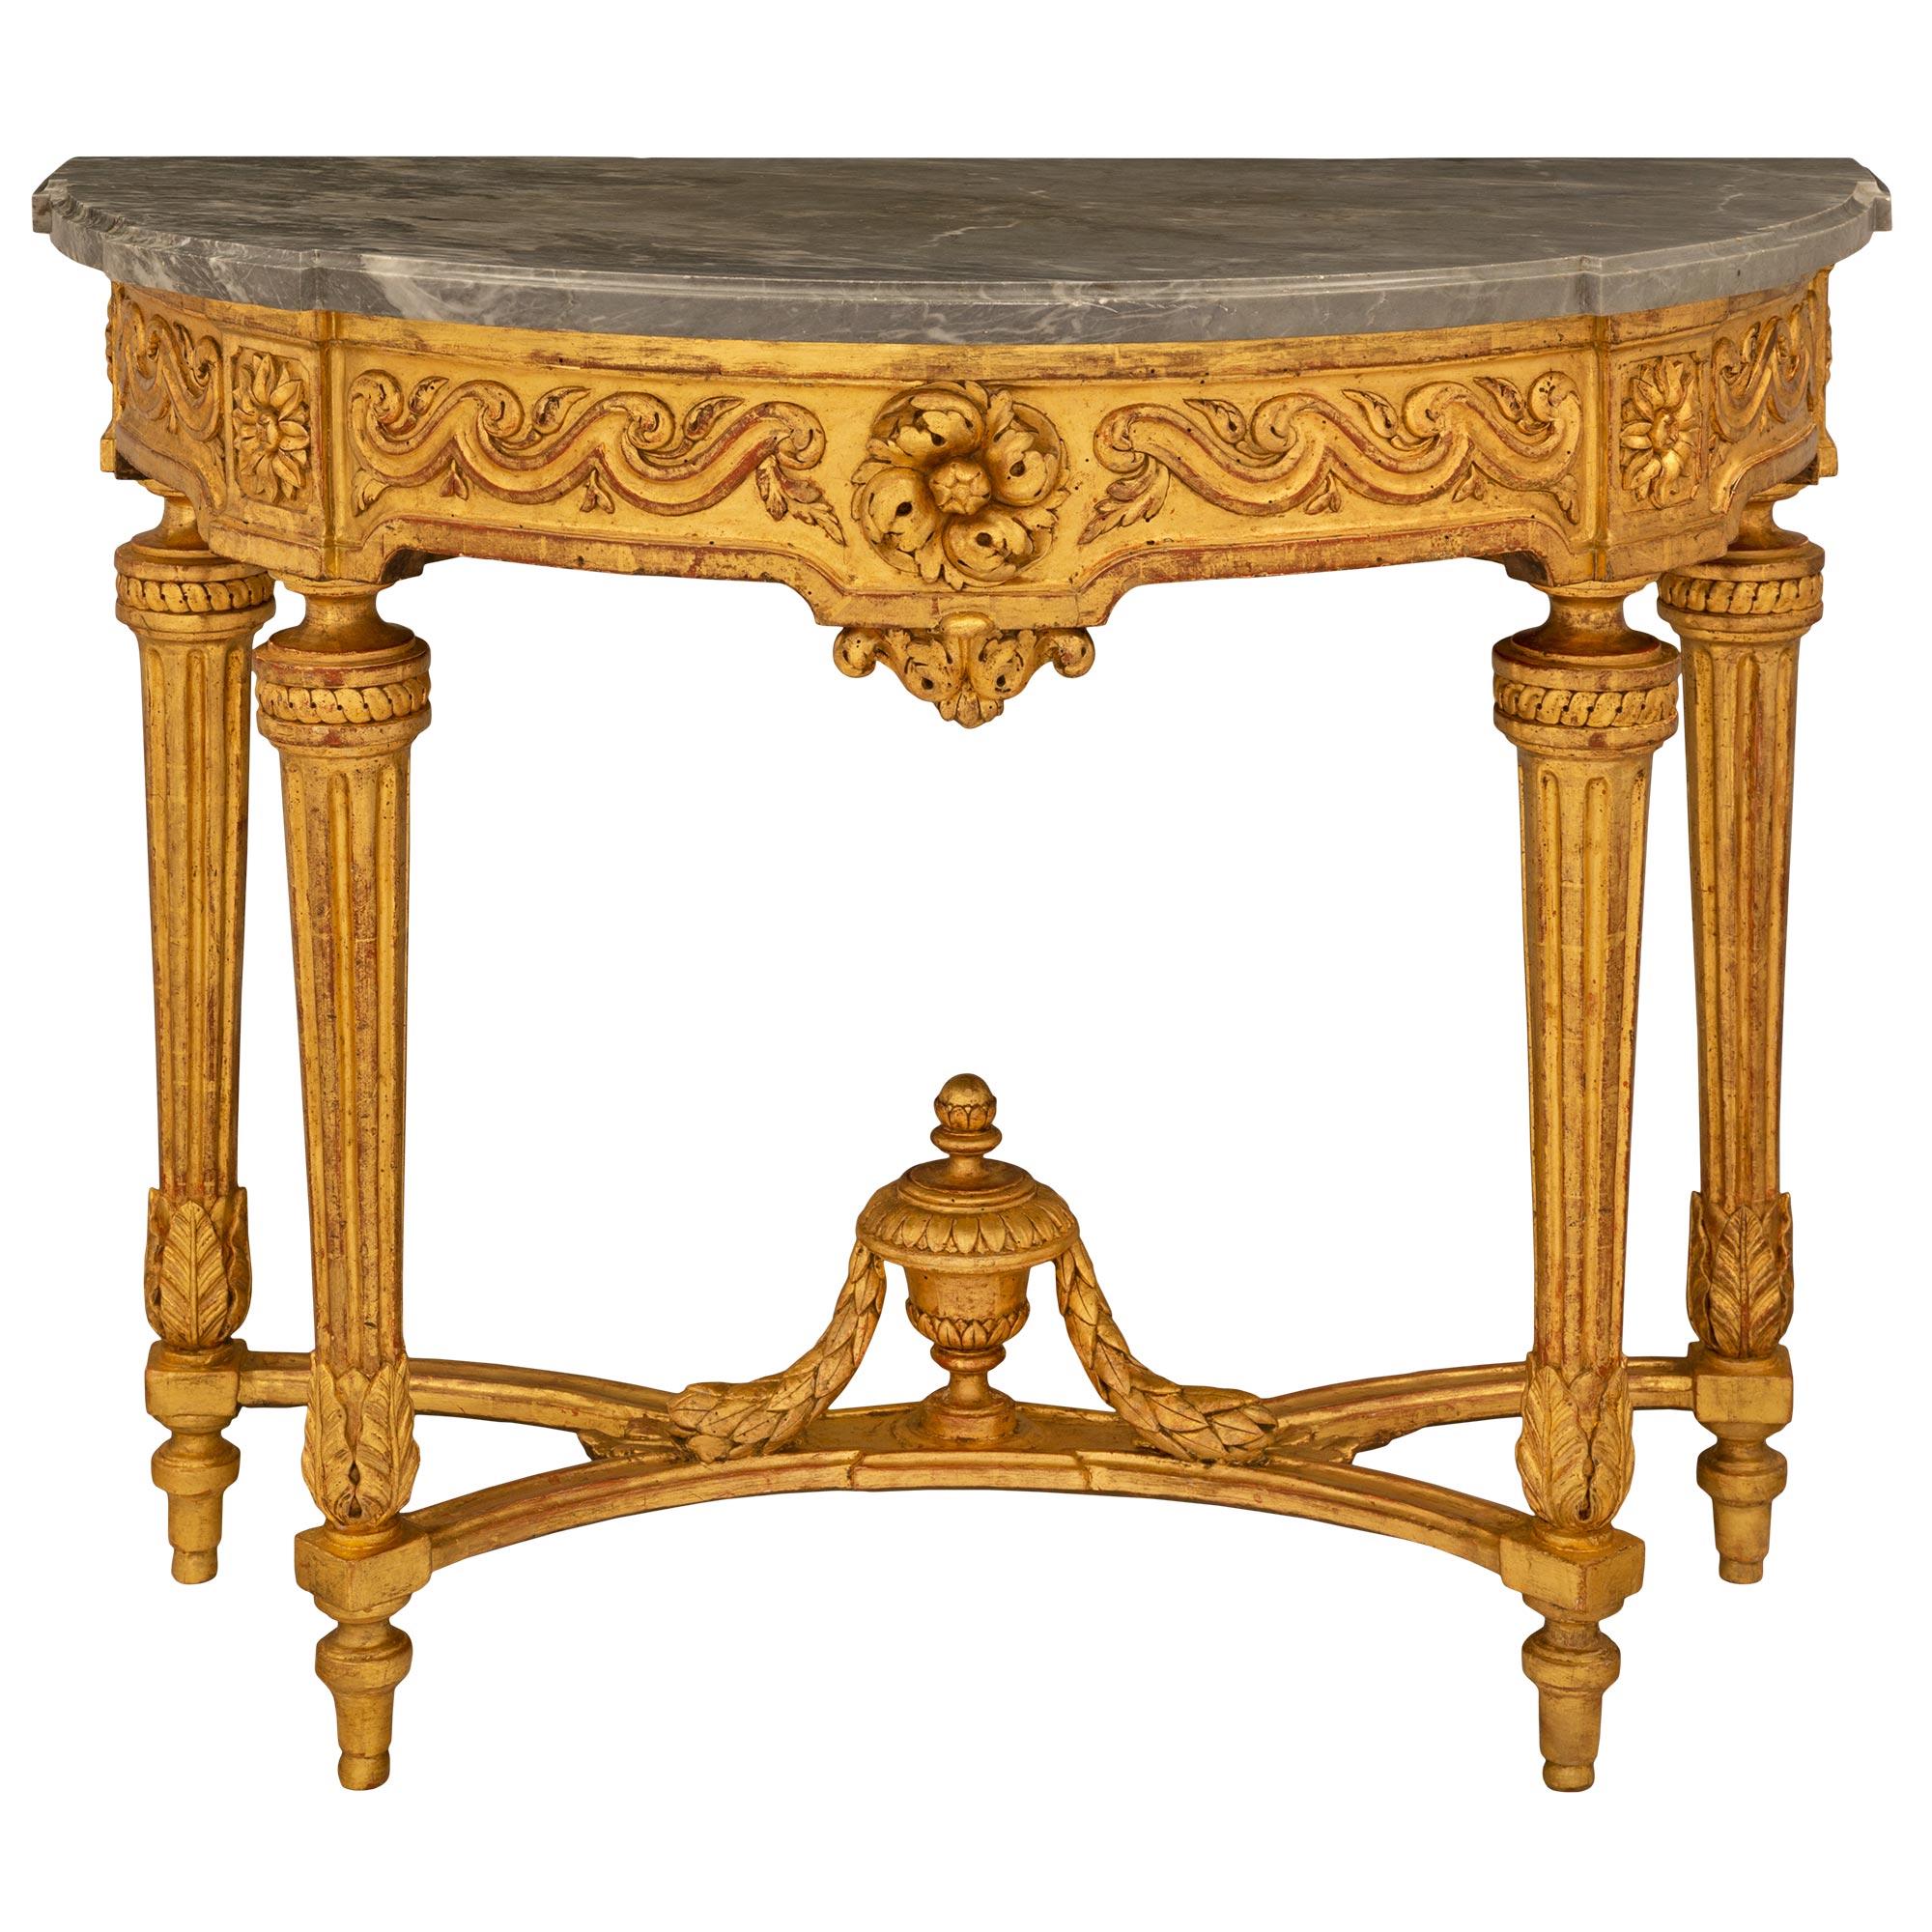 French, 18th Century Louis XVI Period Giltwood And Grey Marble Demi Lune Console